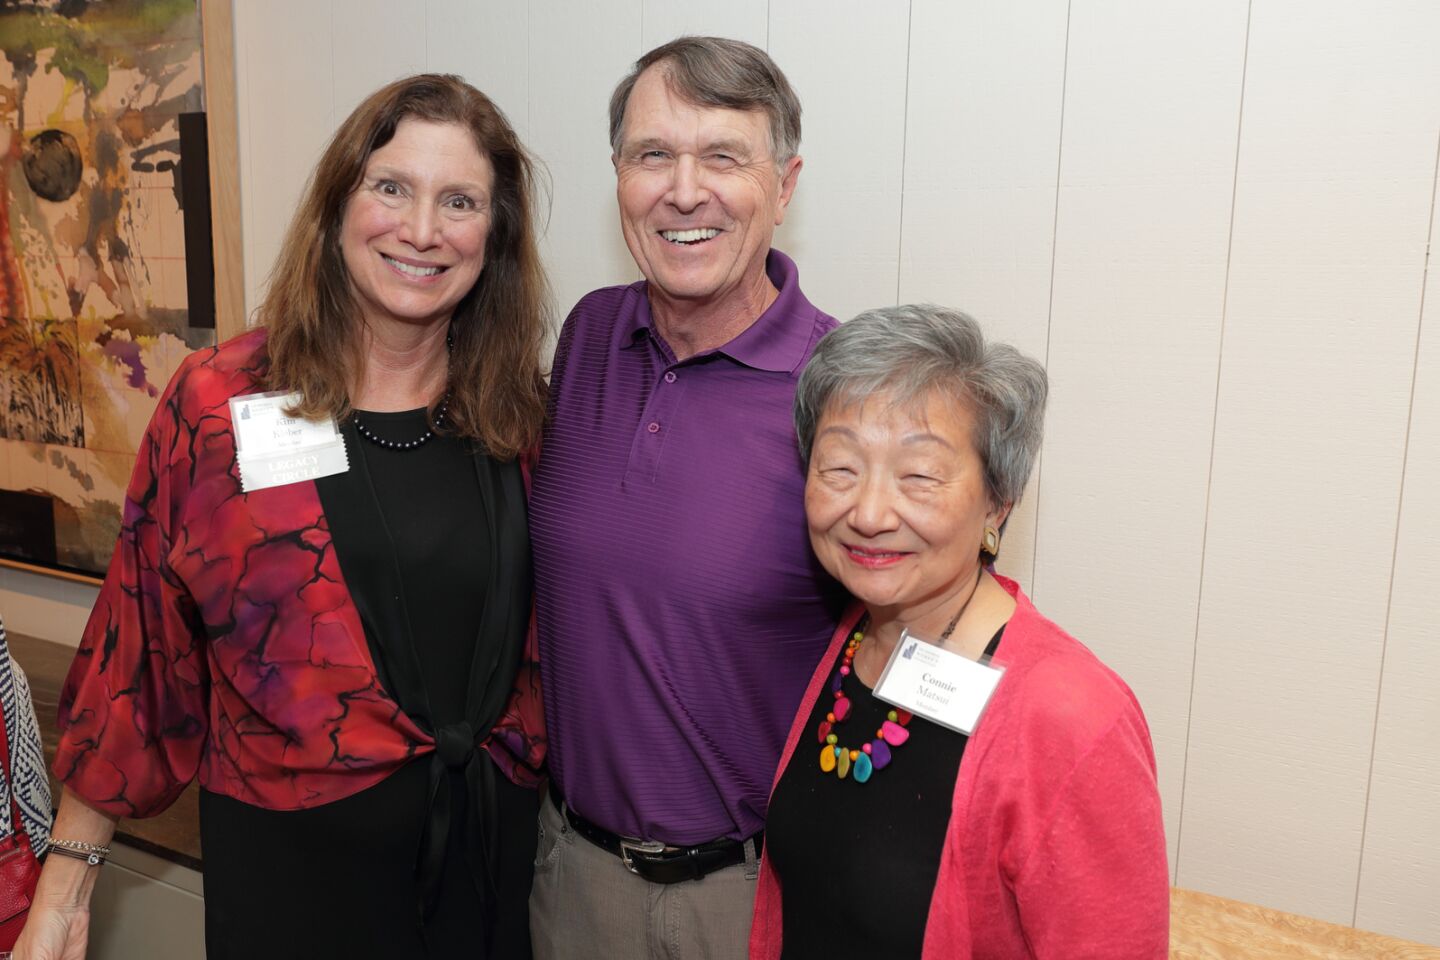 Kim Kleber with hosts Bill Beckman and Connie Matsui